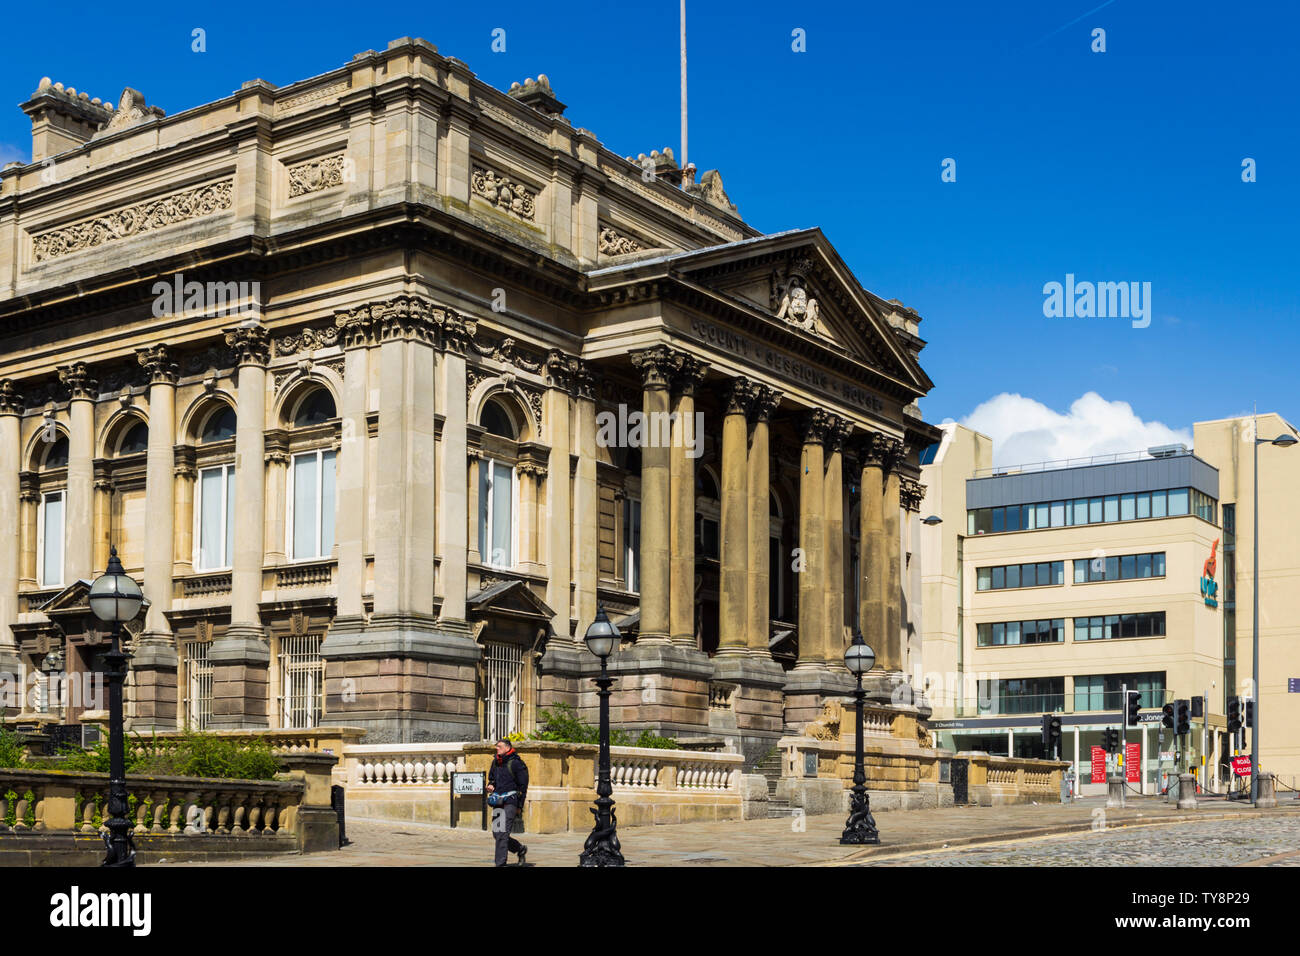 The Country Sessions House, William Brown Street, Liverpool. The County Sessions House was built between 1882 and 1884 to house the Quarter Sessions. Stock Photo